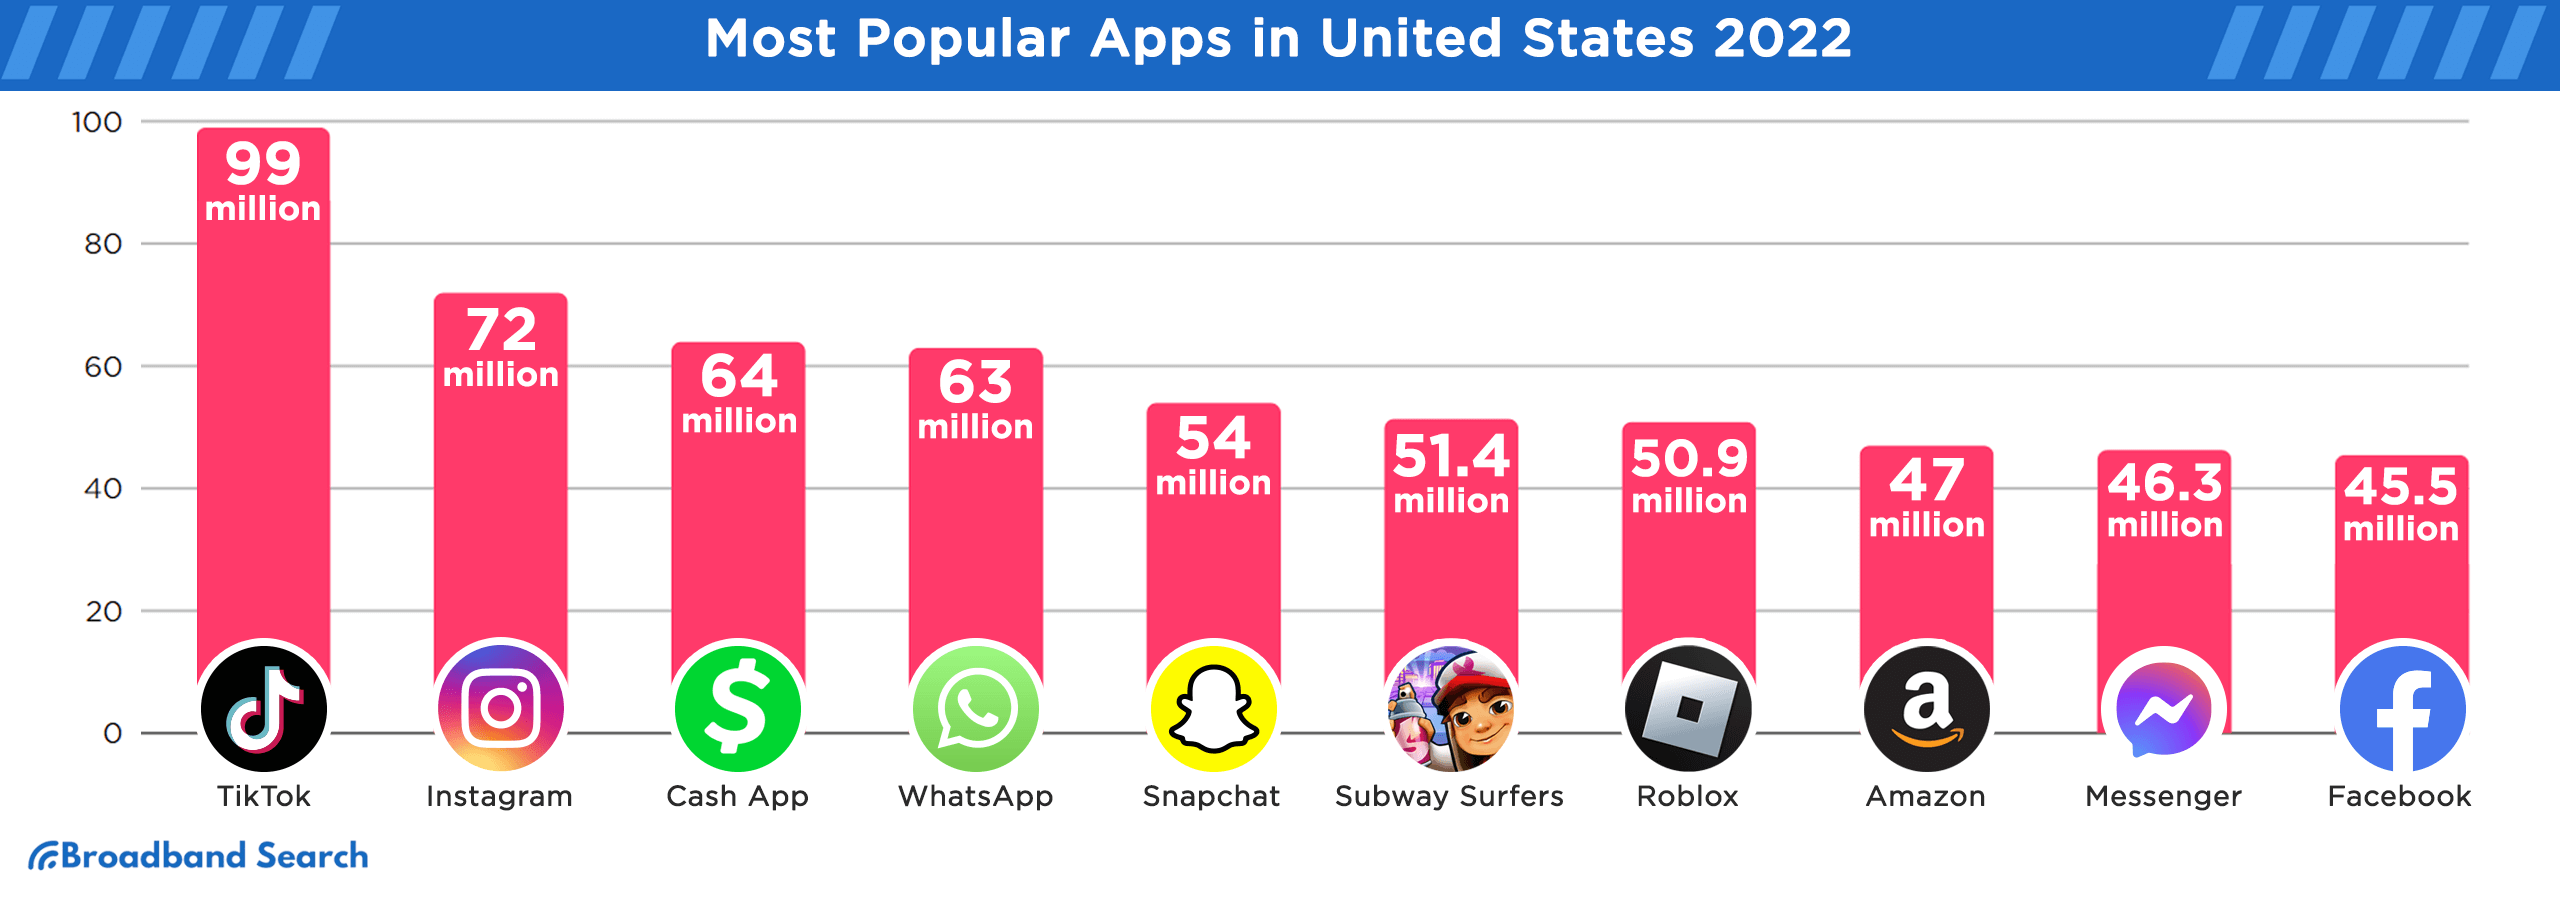 Most popular apps in the United States in 2022 where numbers are shown in the millions